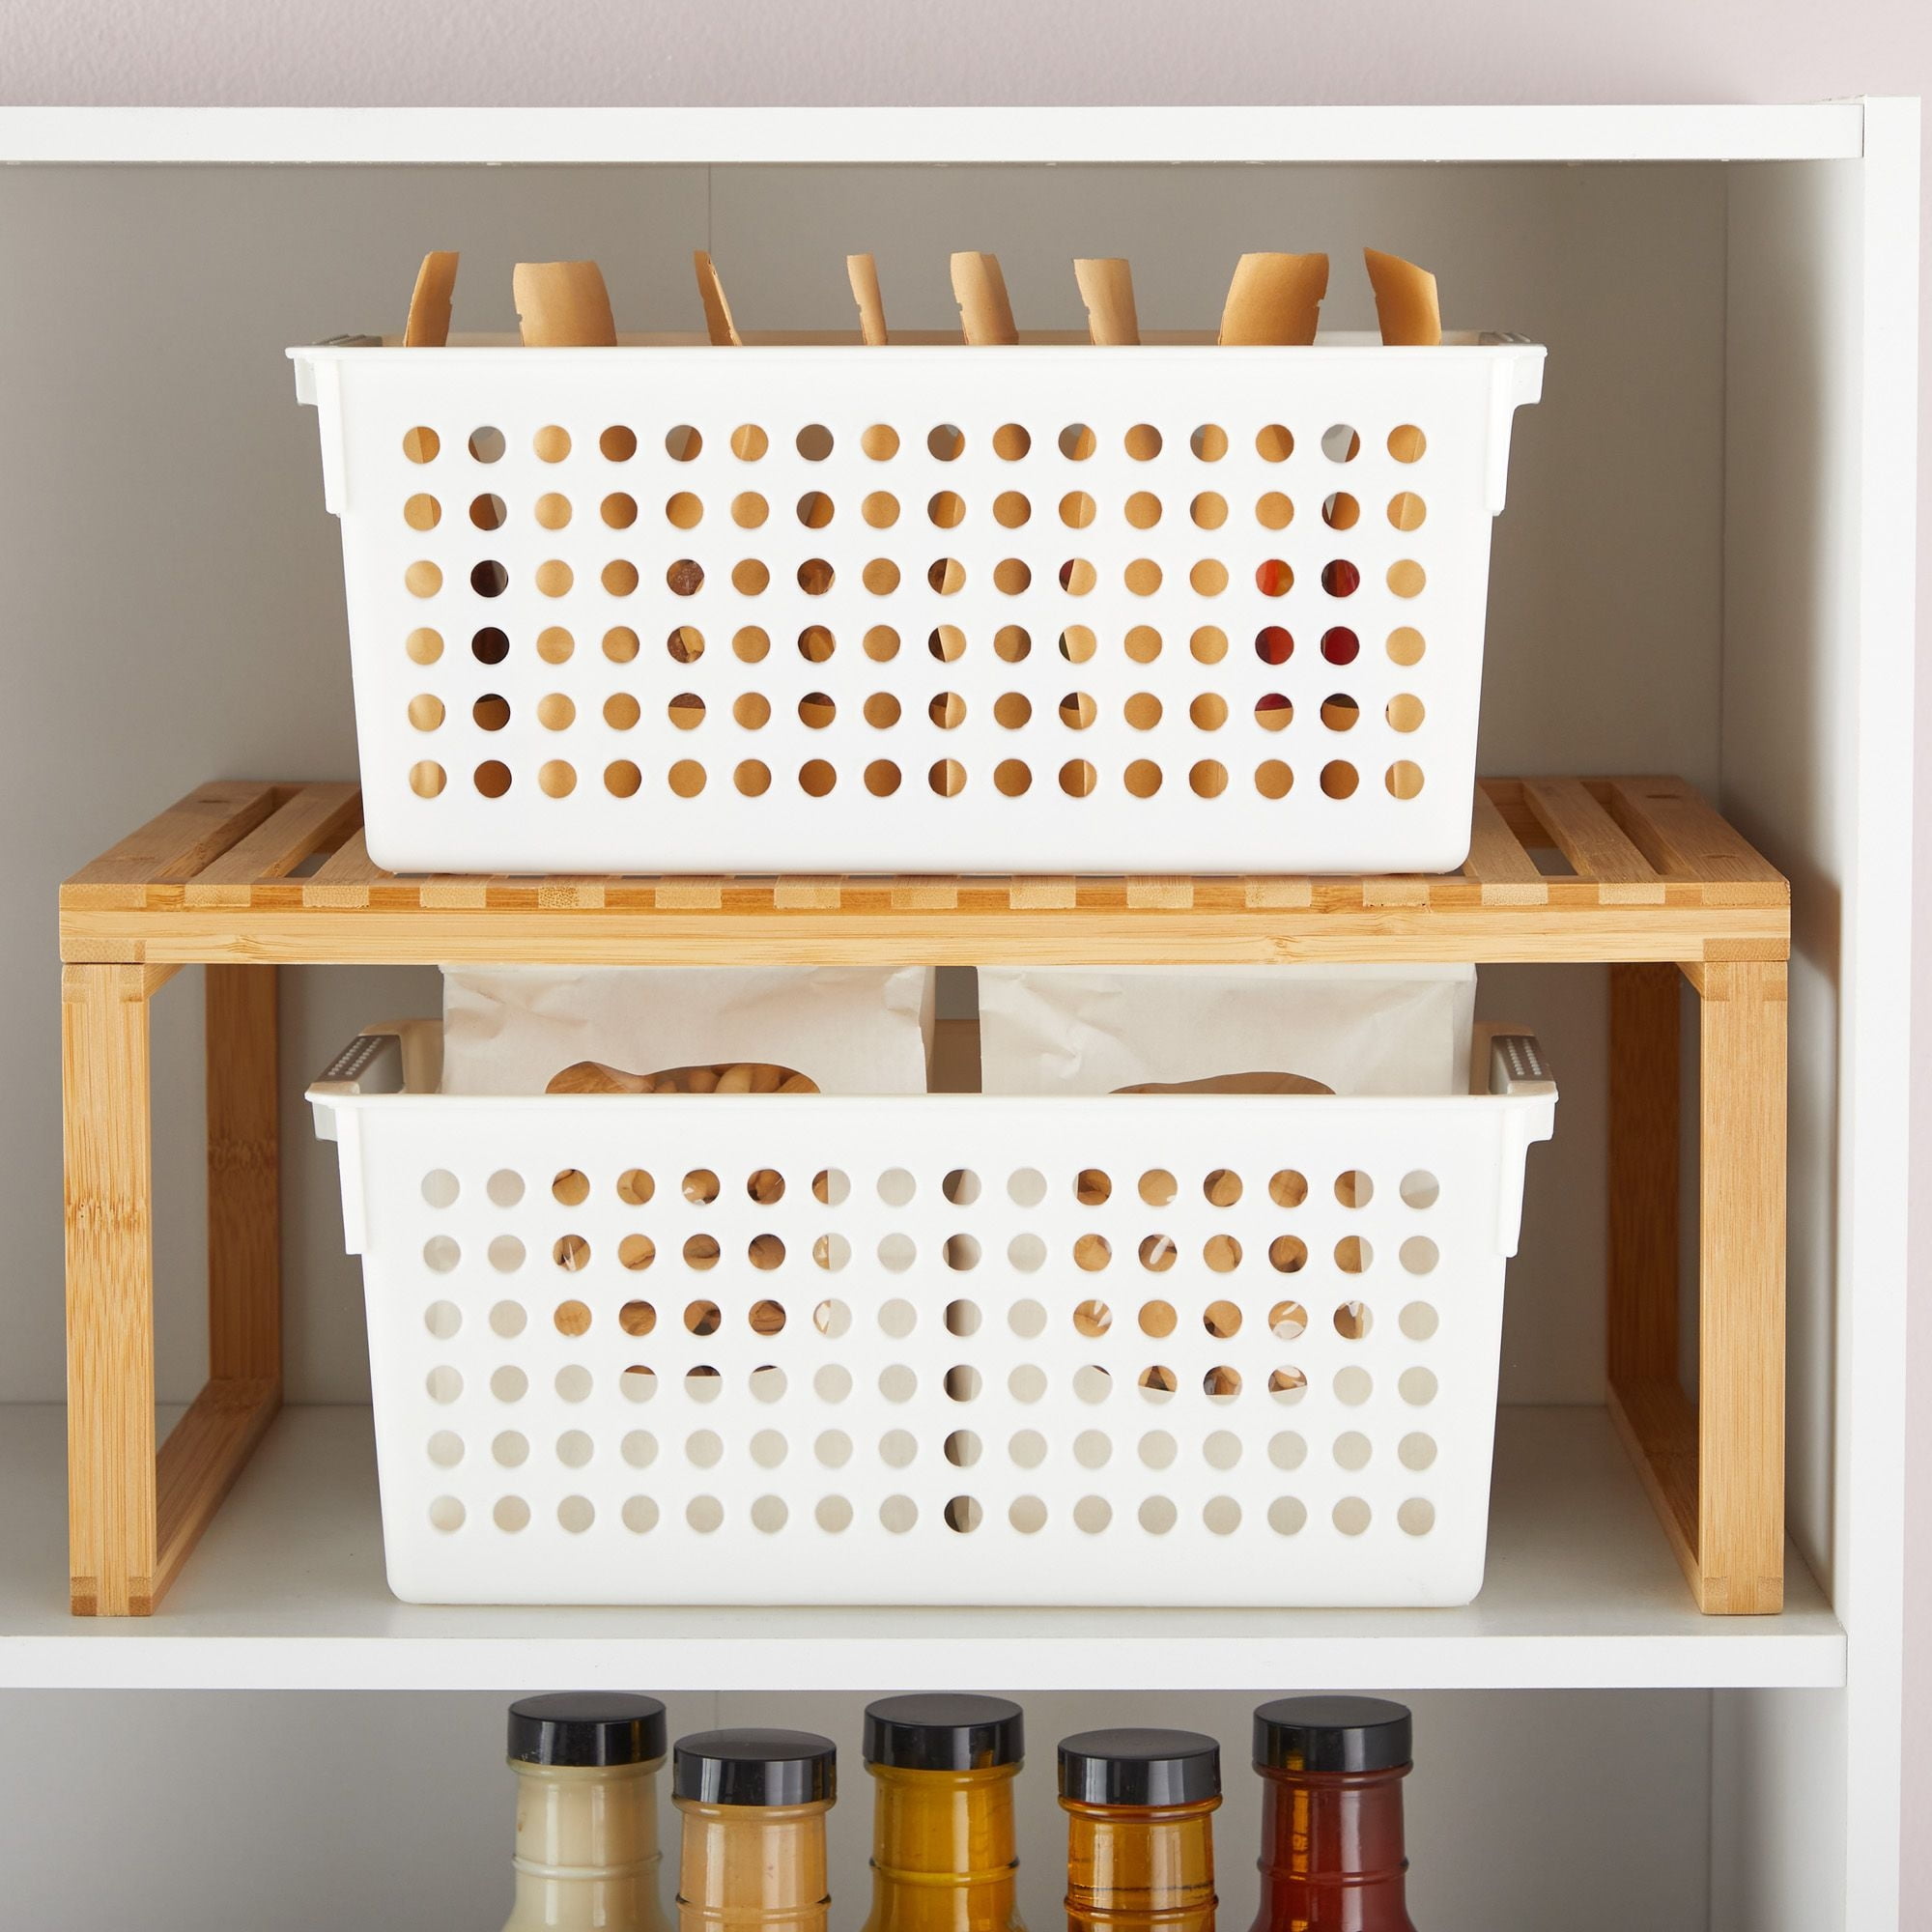 Farmlyn Creek 4 Pack Plastic Baskets For Organizing, Small White Bins With  Gray Handles For Kitchen, Bathroom, Laundry, Shelf (5 Inches) : Target